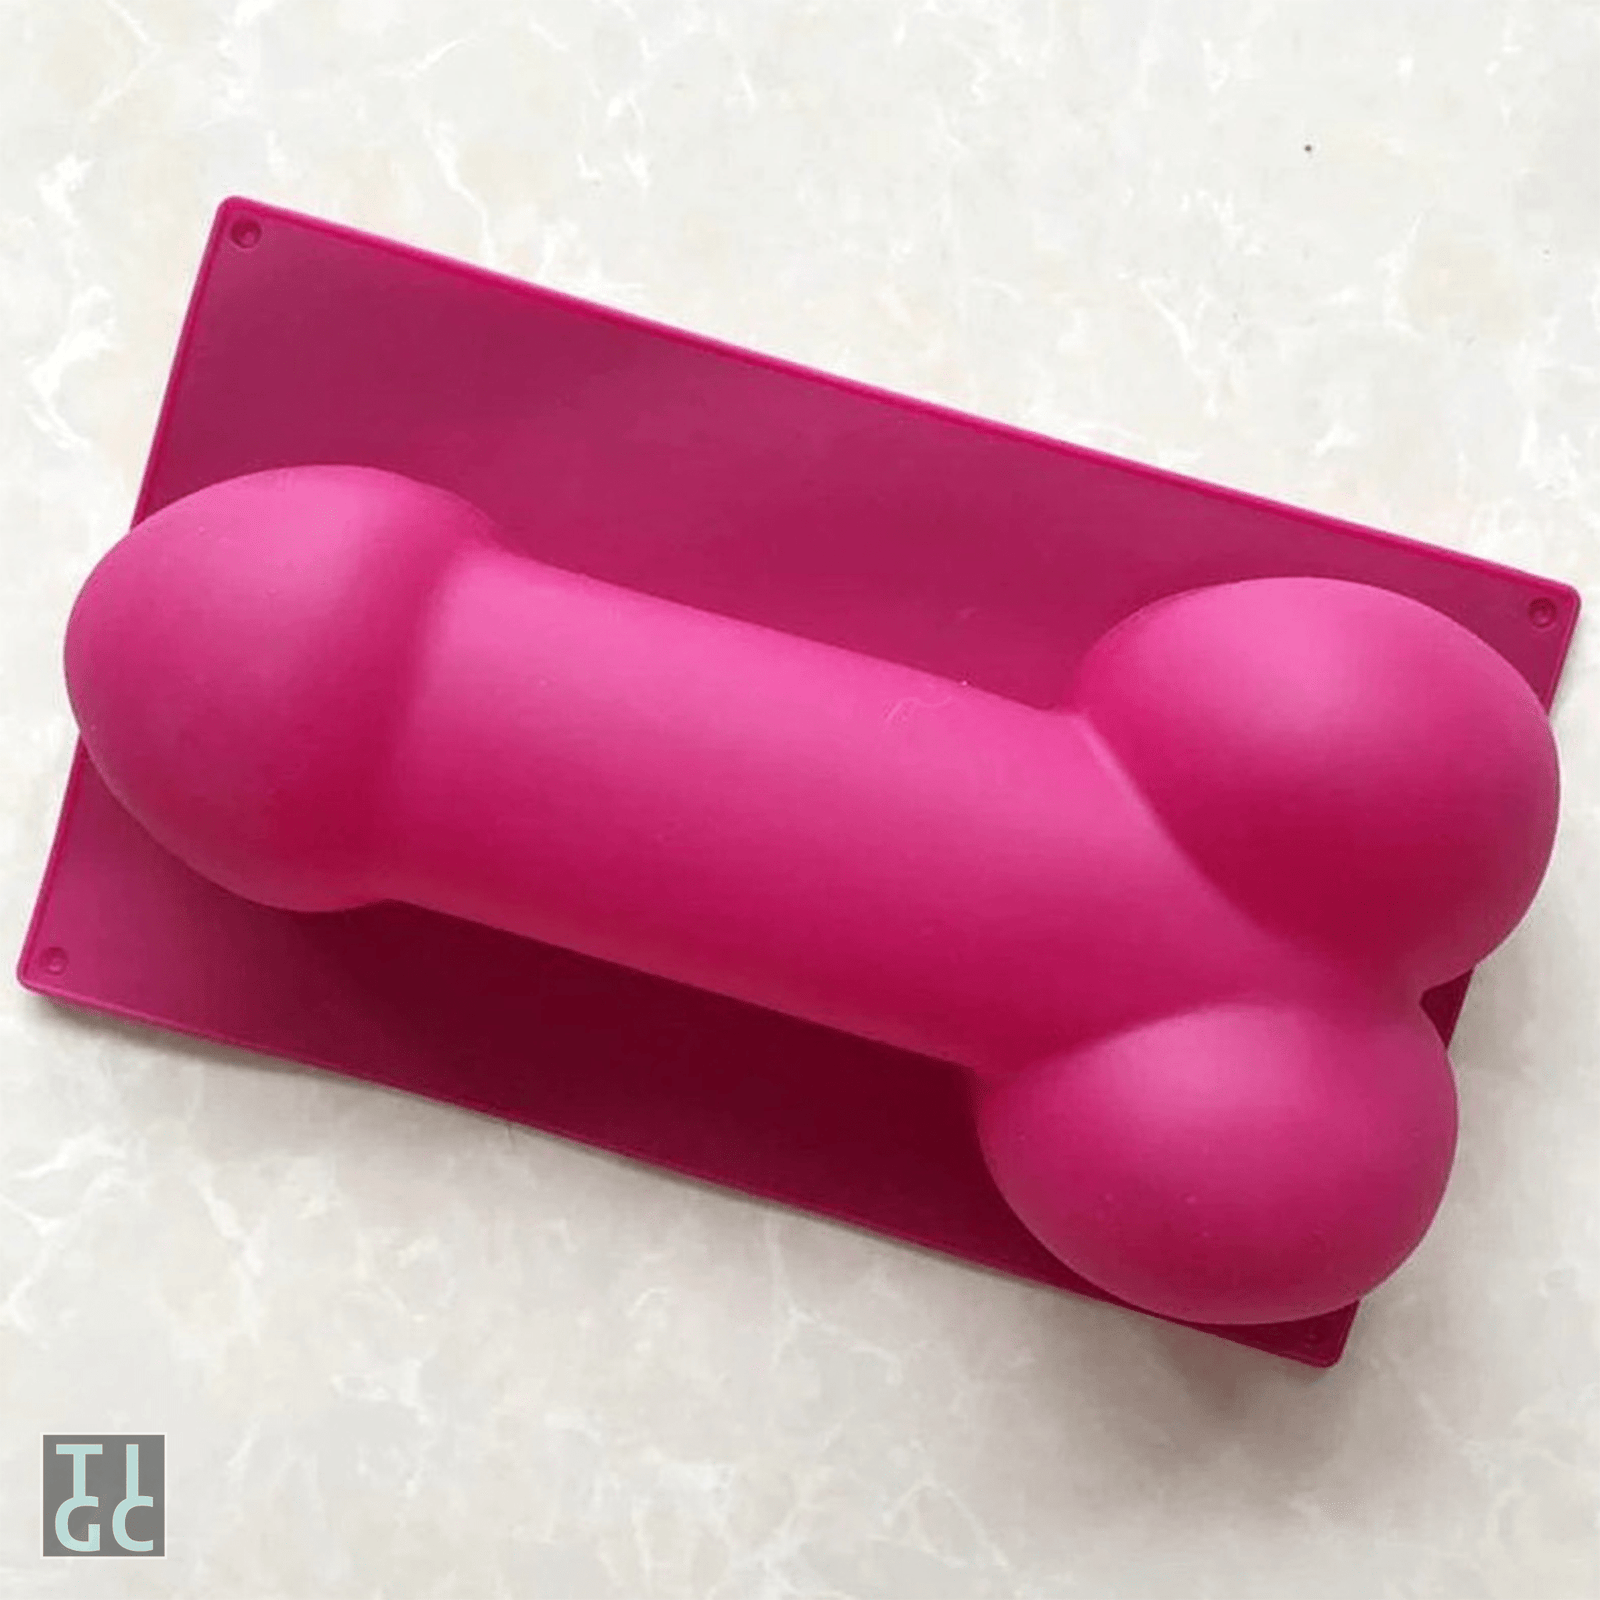 How To Reuse a Penis Pan